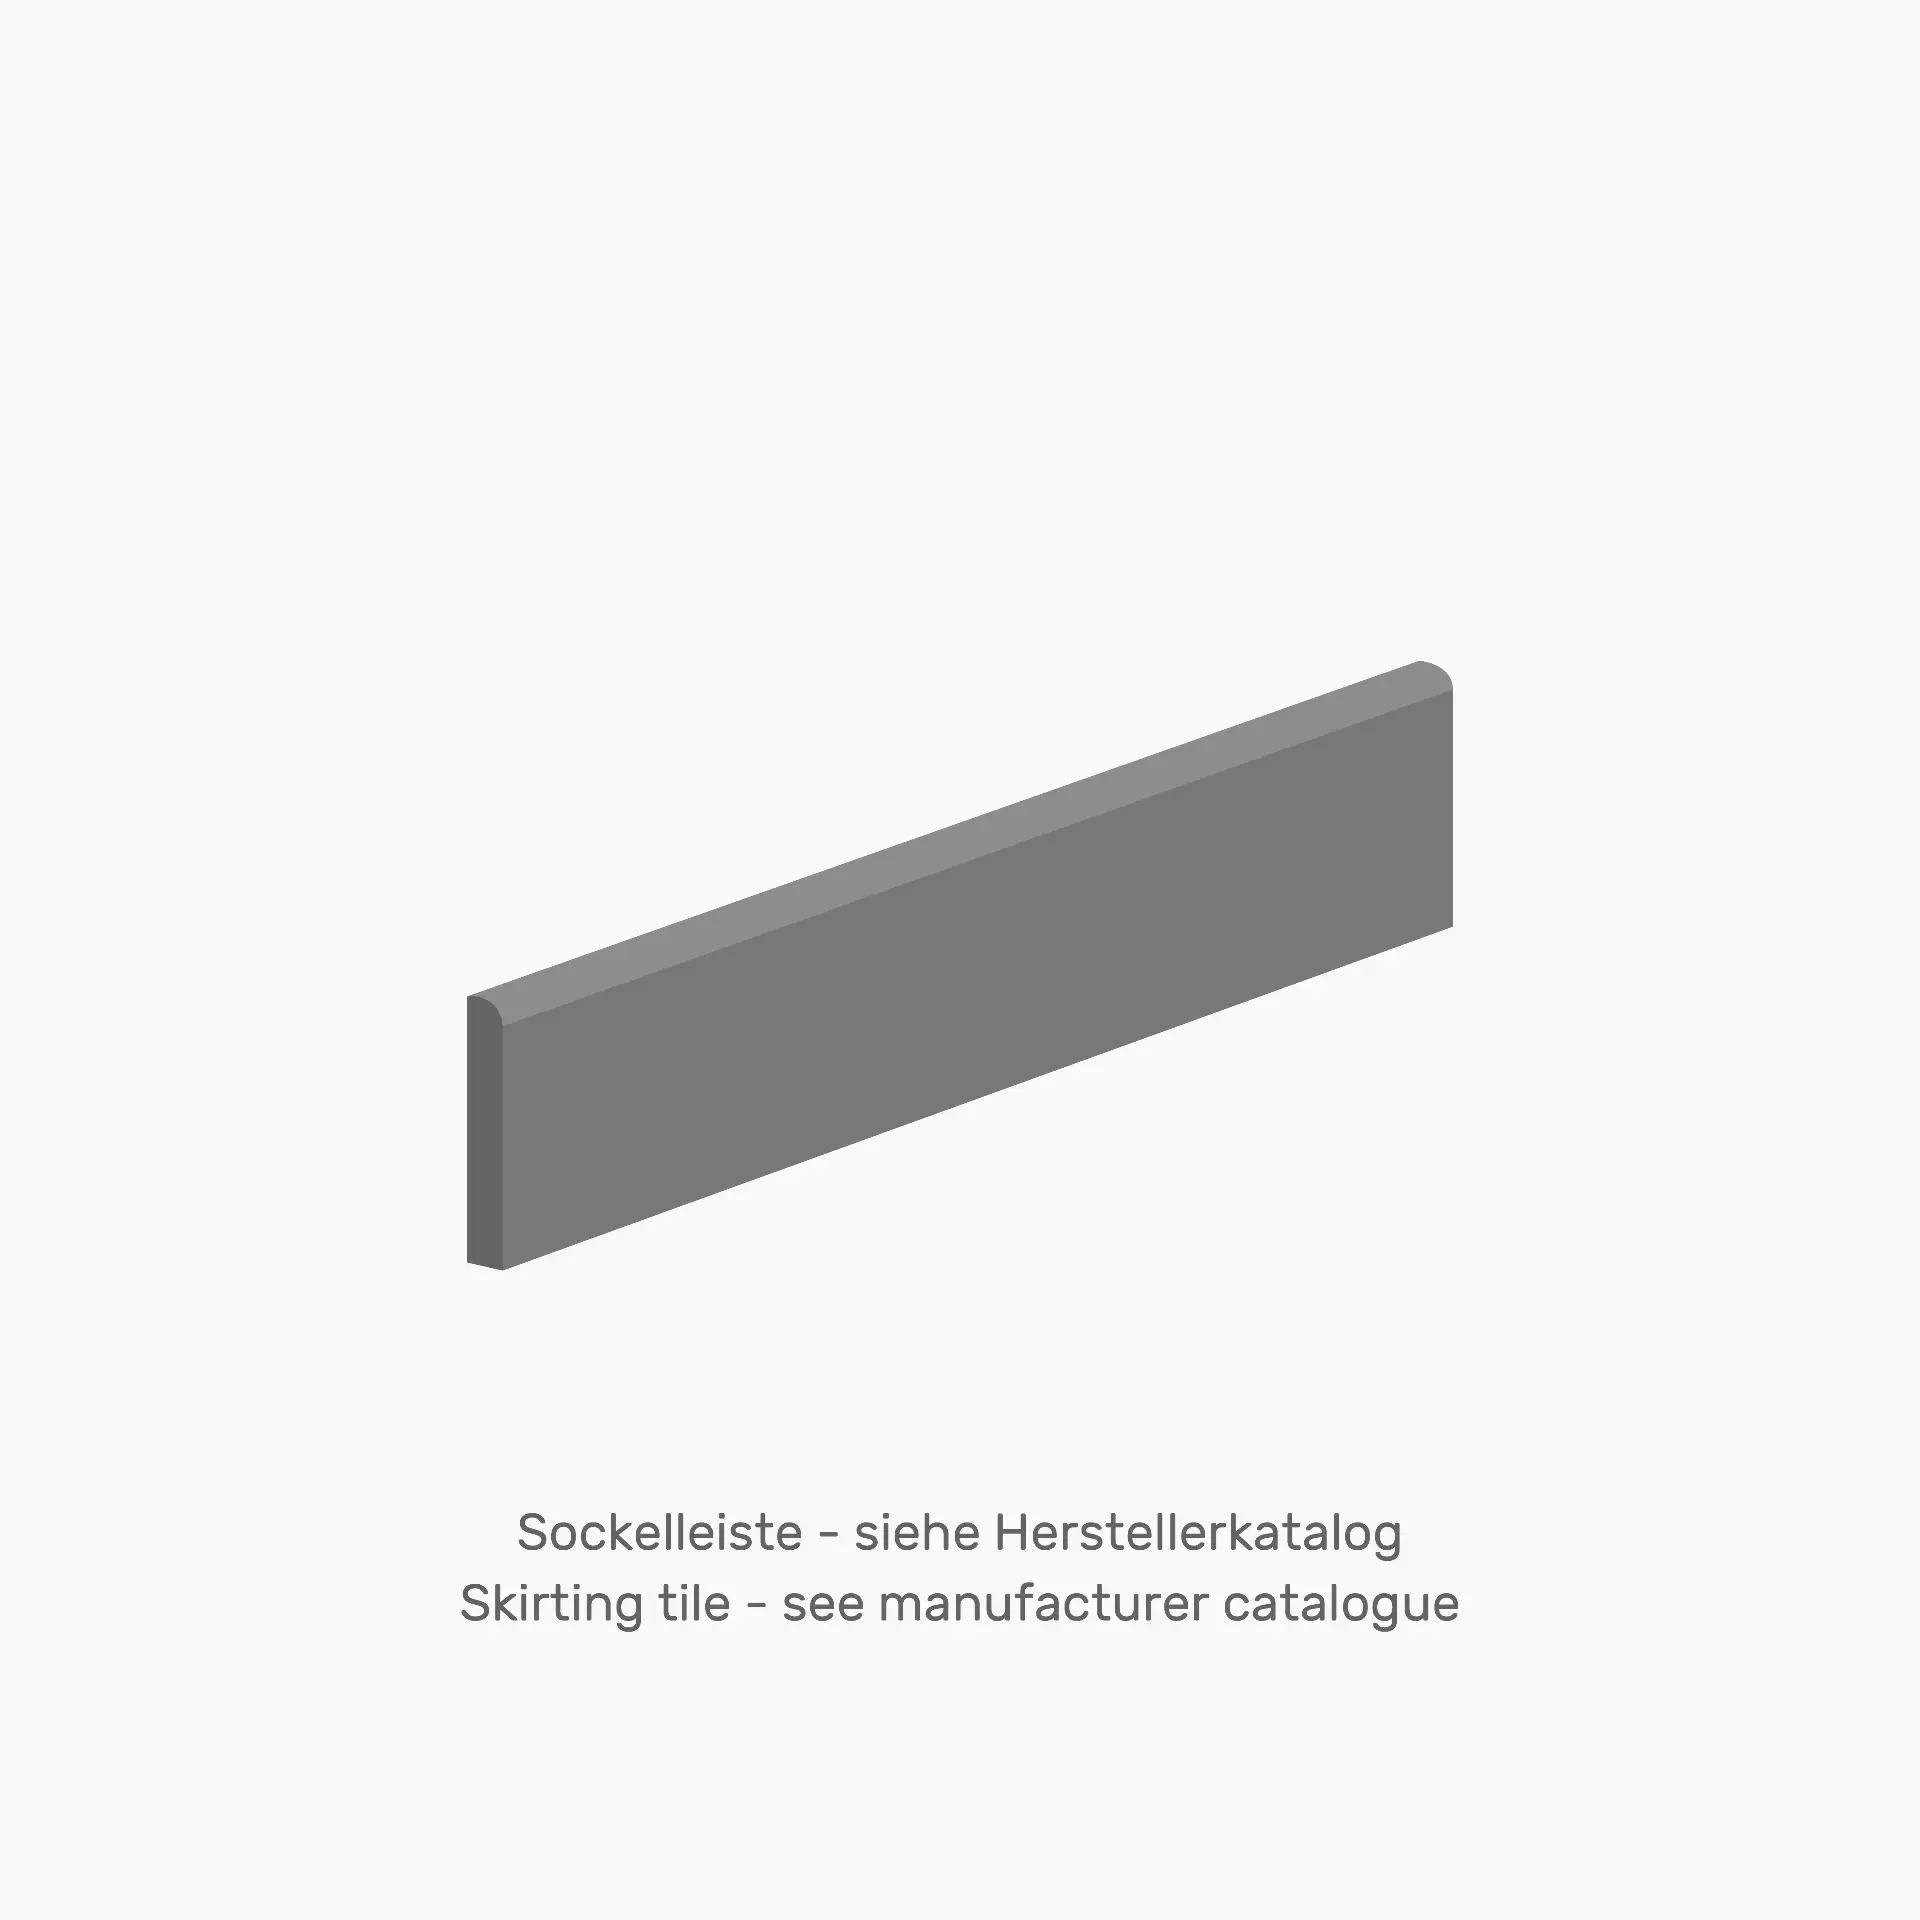 Ergon Playground/Architect Resin Bruxelles Black Naturale Skirting board E2HE 7,5x60cm rectified 9,5mm